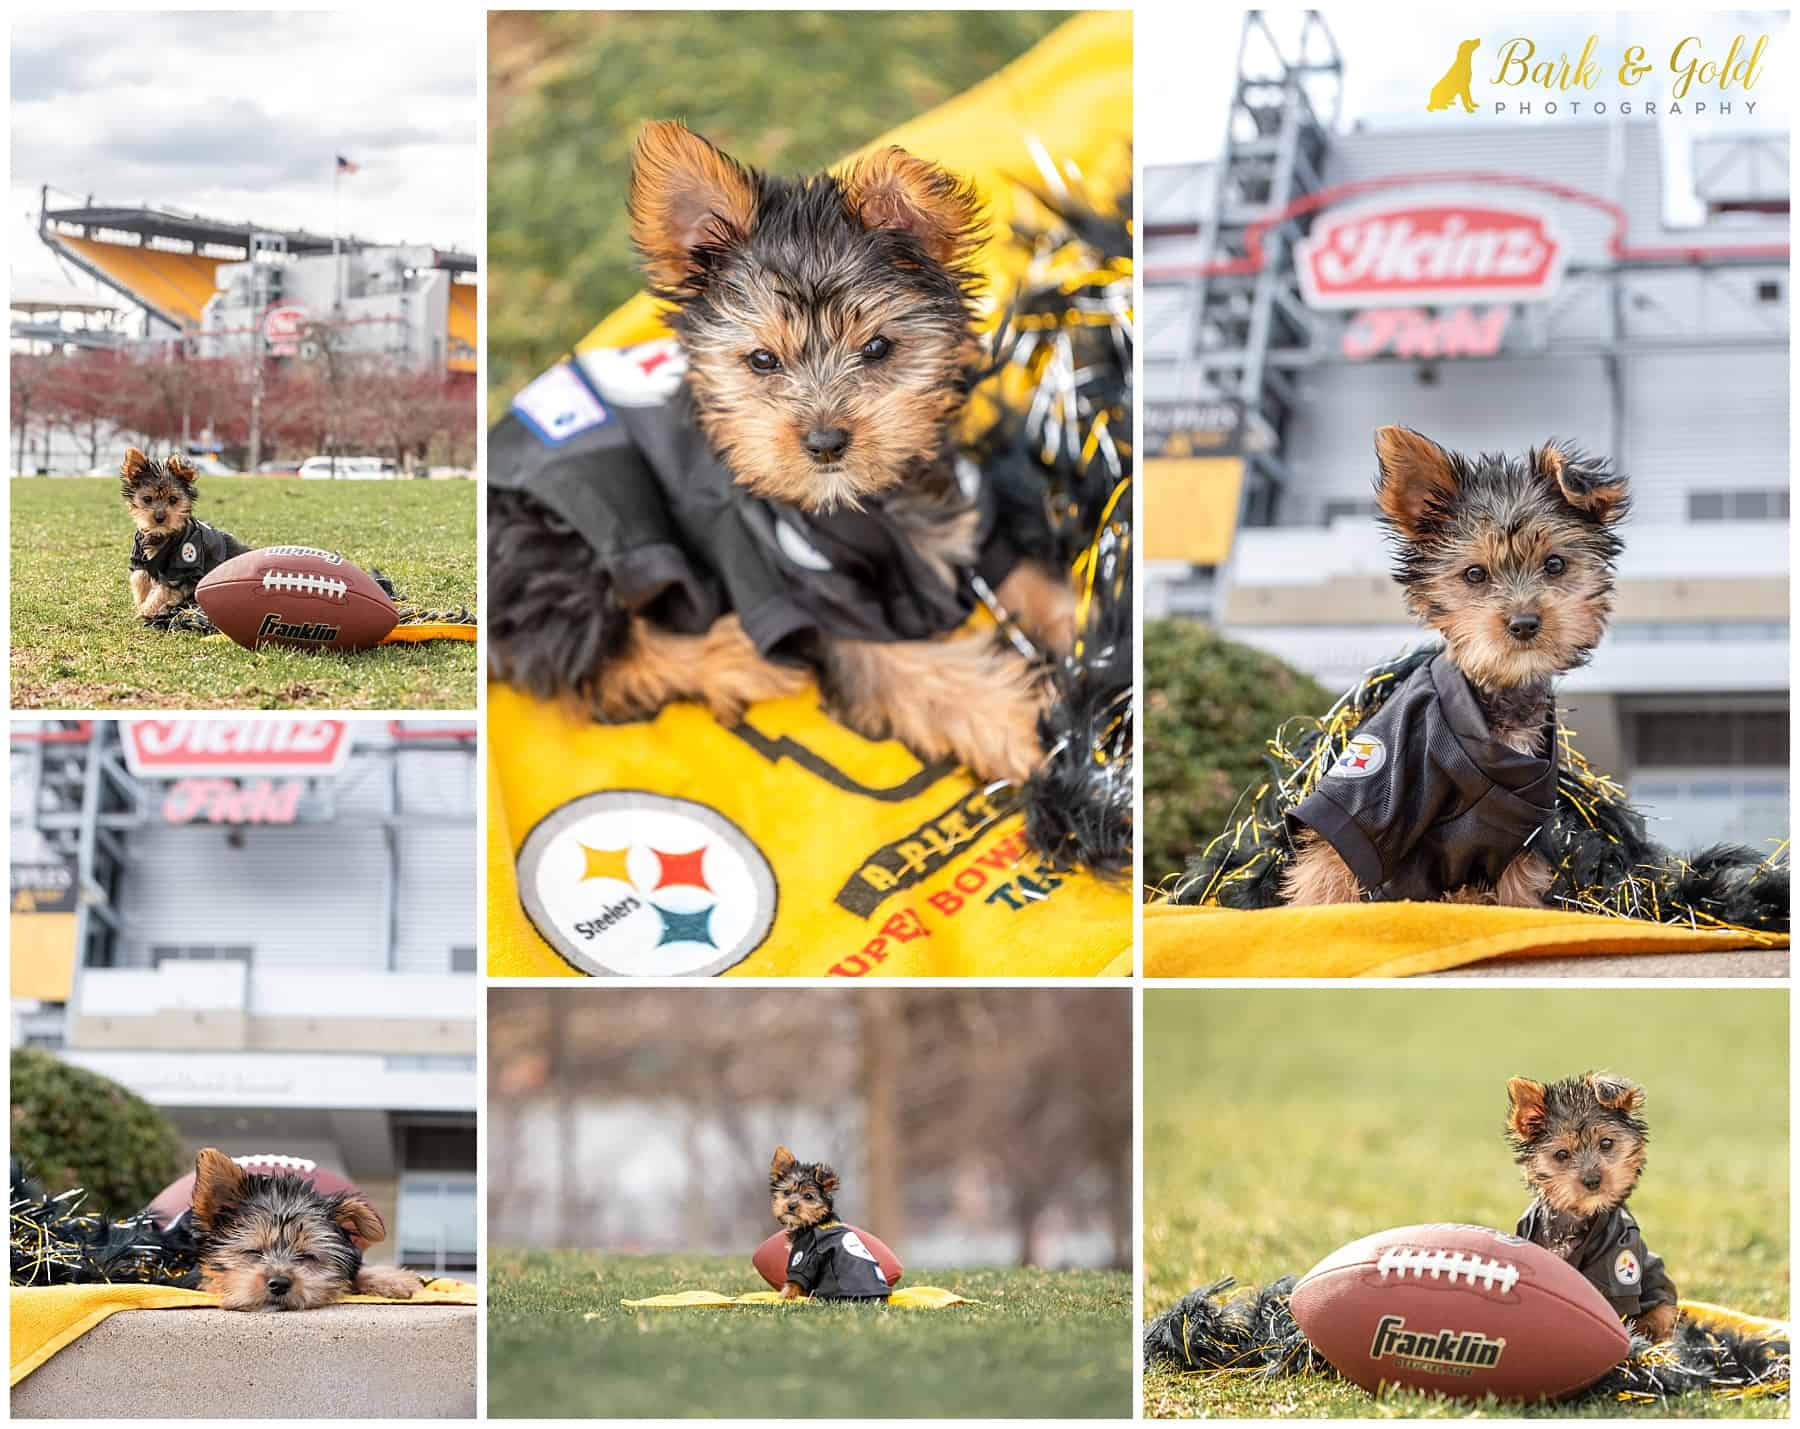 Yorkshire terrier puppy in Steelers jersey posing with a football outside of Pittsburgh's Heinz Field during a spring pet photography session